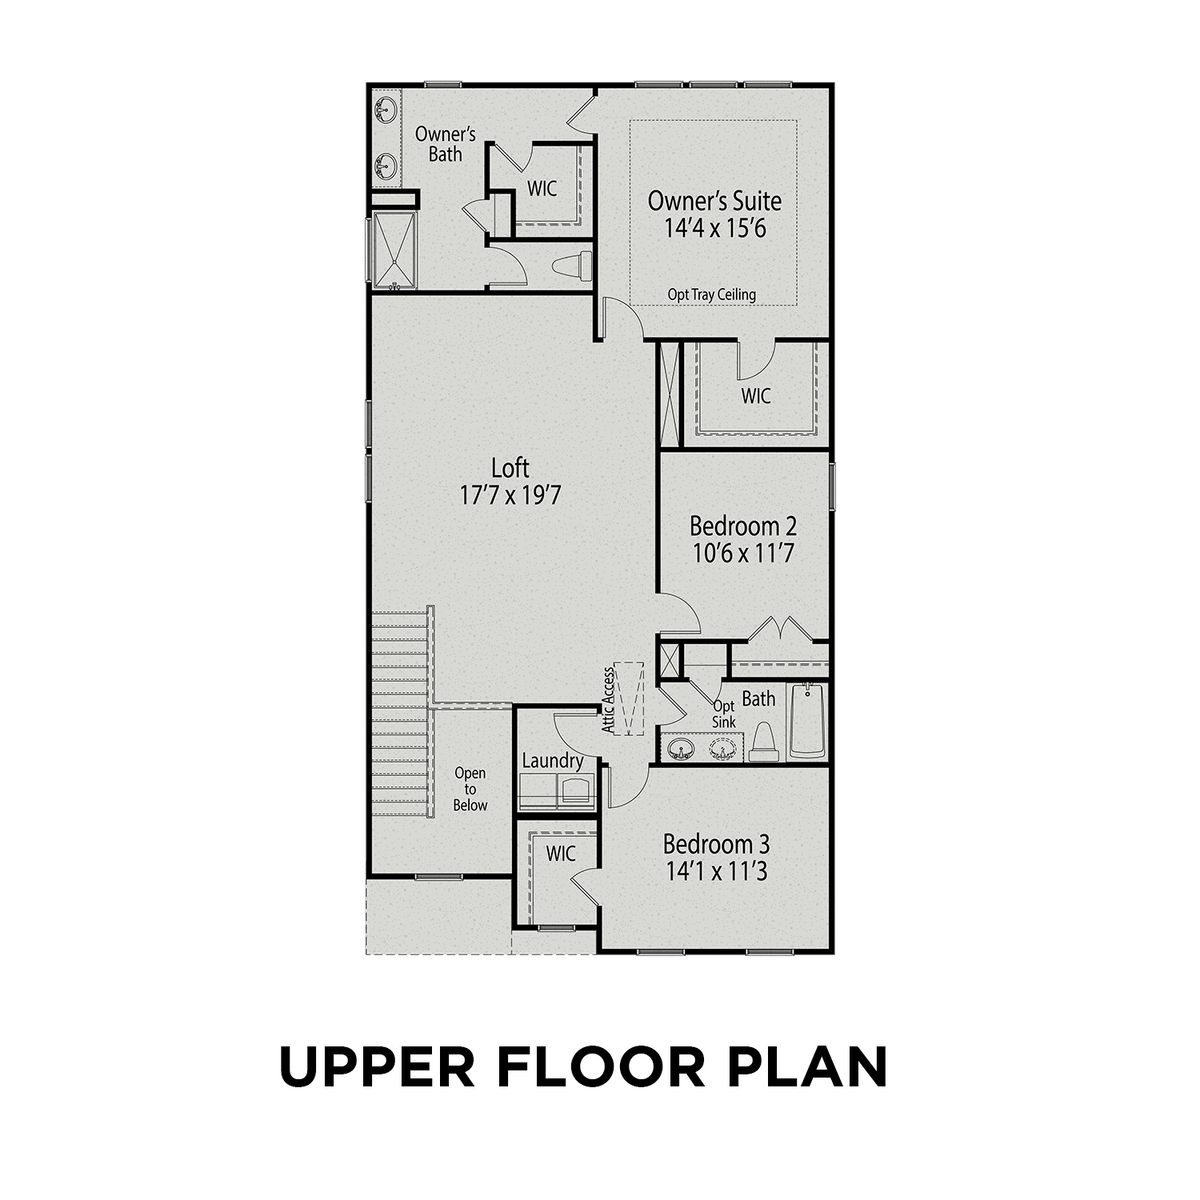 2 - The Adalynn B floor plan layout for 418 Forestview Crest Way in Davidson Homes' Highland Forest community.